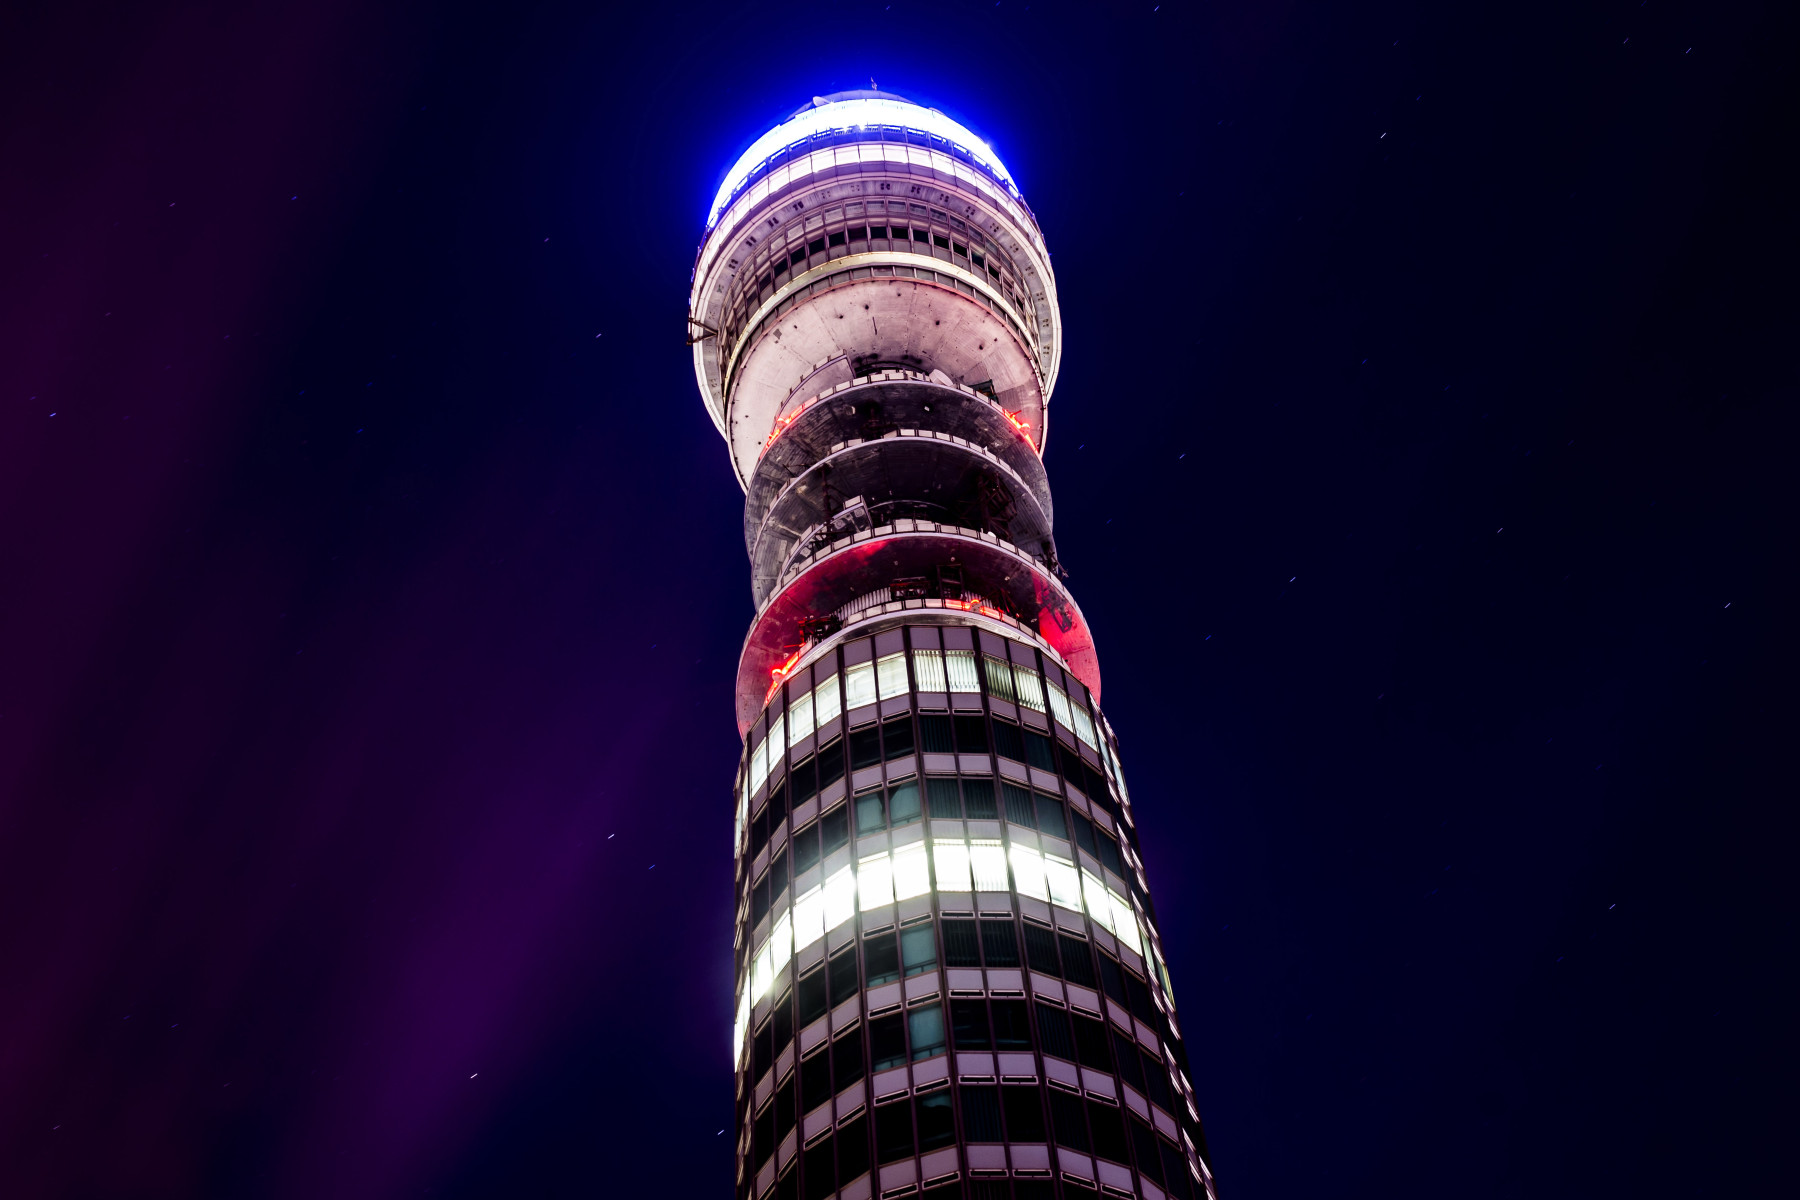 Image from underneath the BT Tower at night